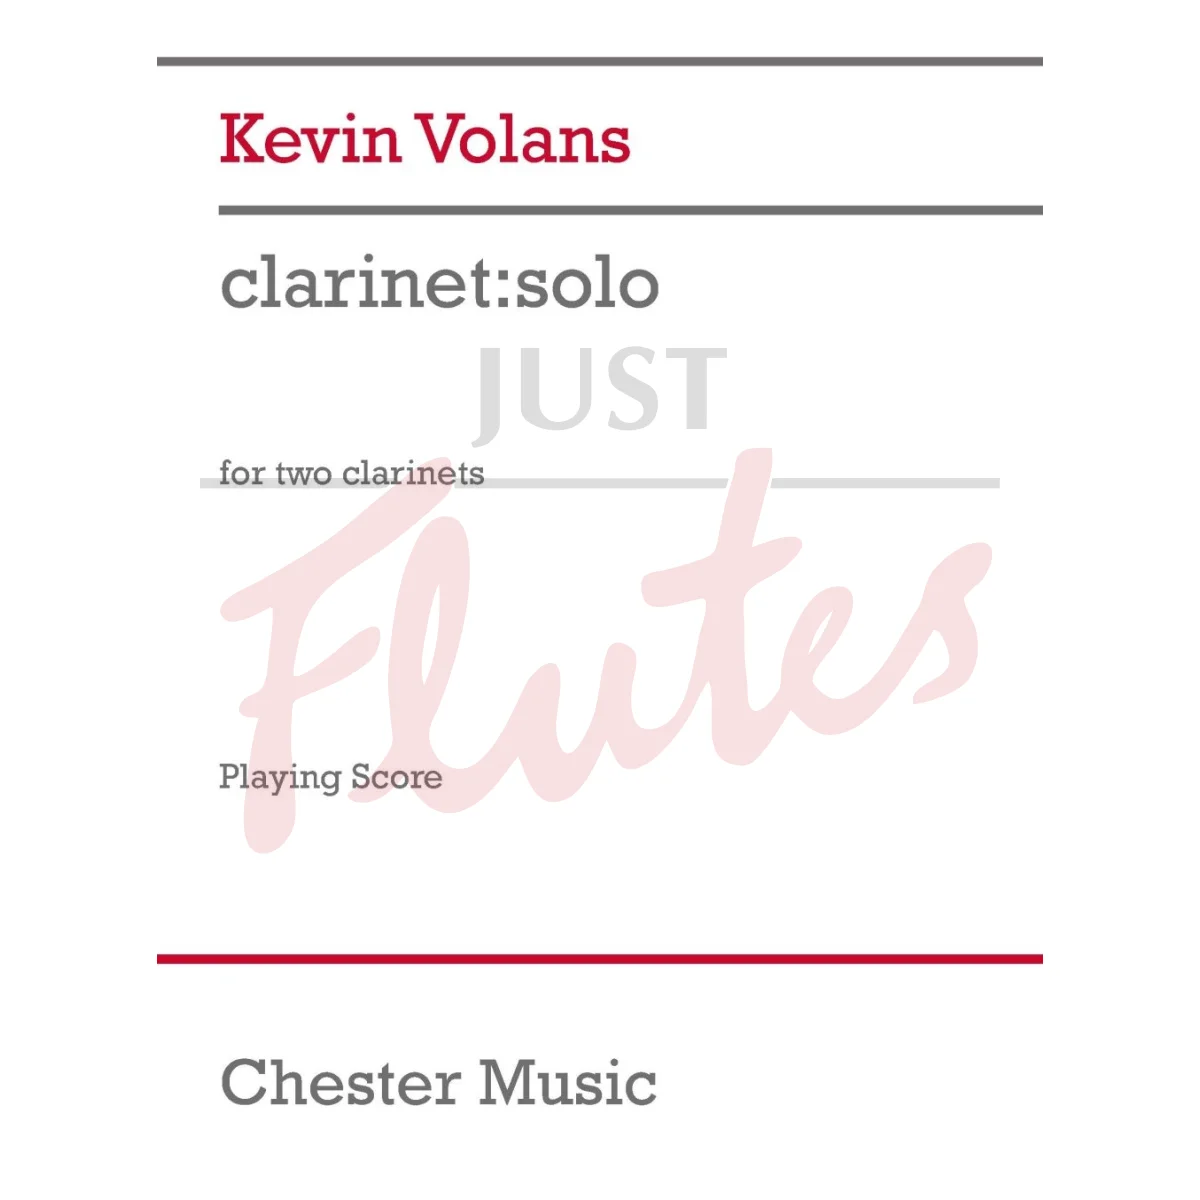 clarinet:solo for Two Clarinets